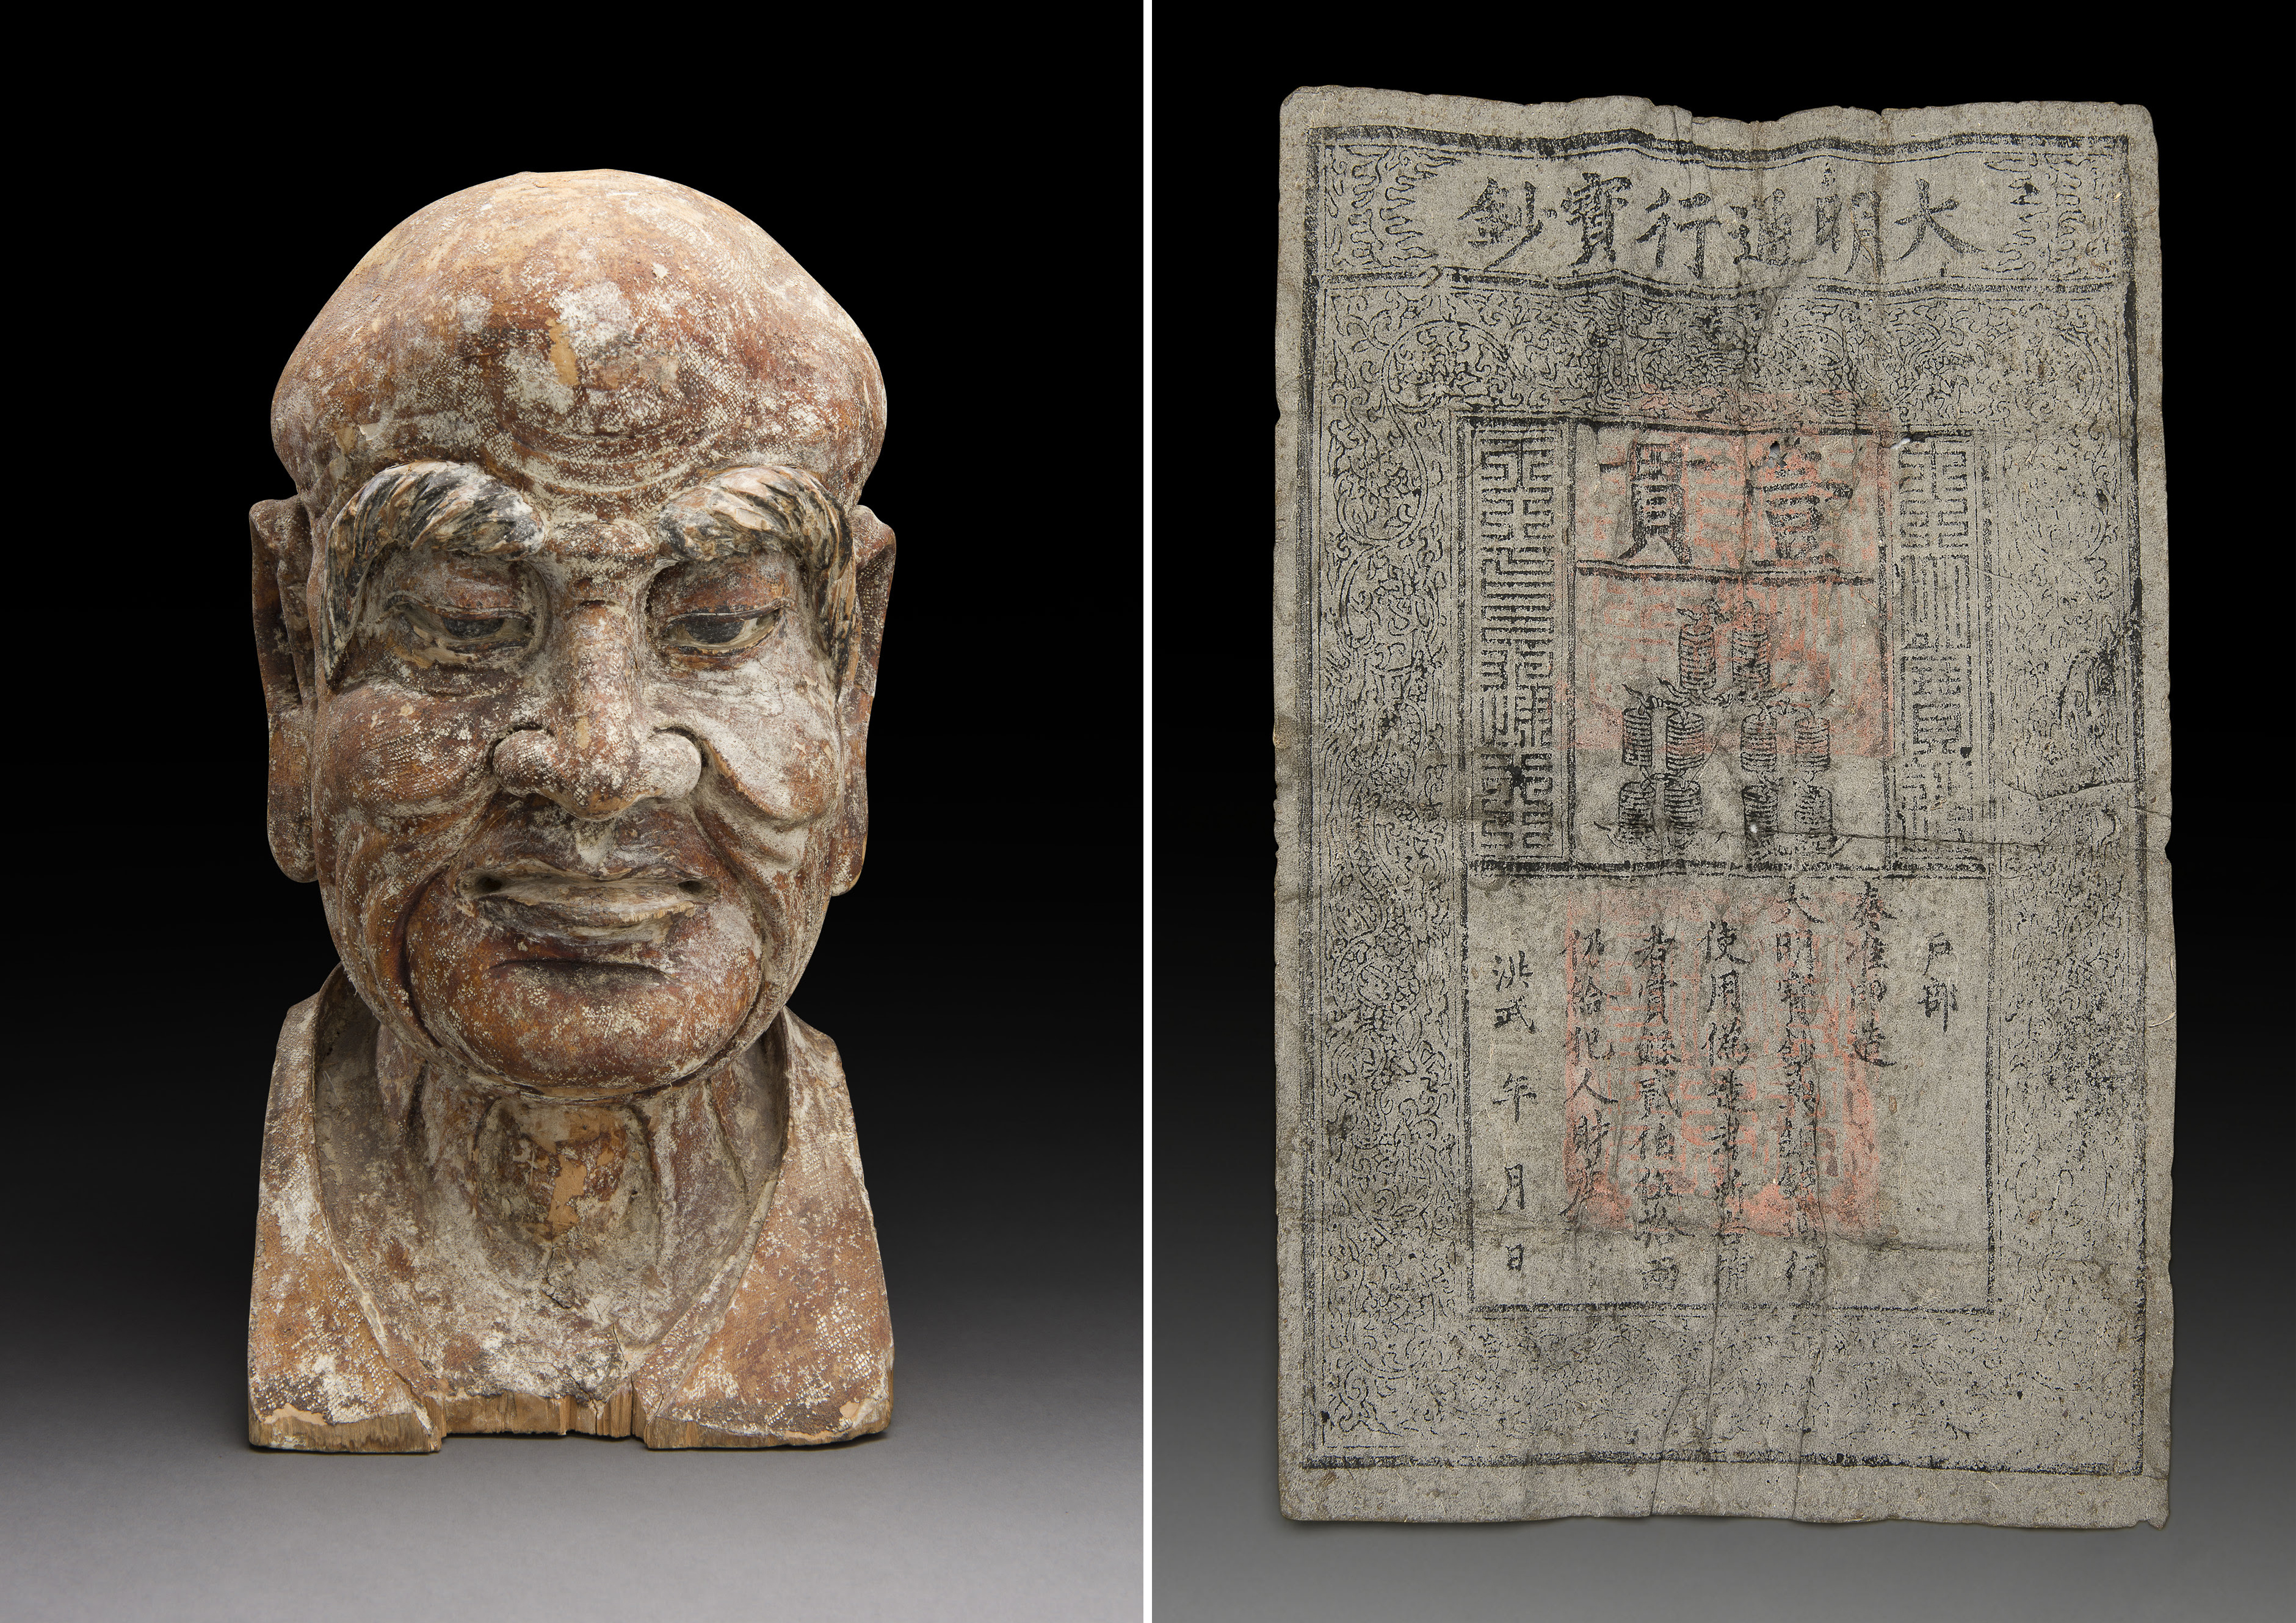 Ming Dynasty Banknote Found in Sculpture, Record Price for Nike Sneakers, and More Fresh News